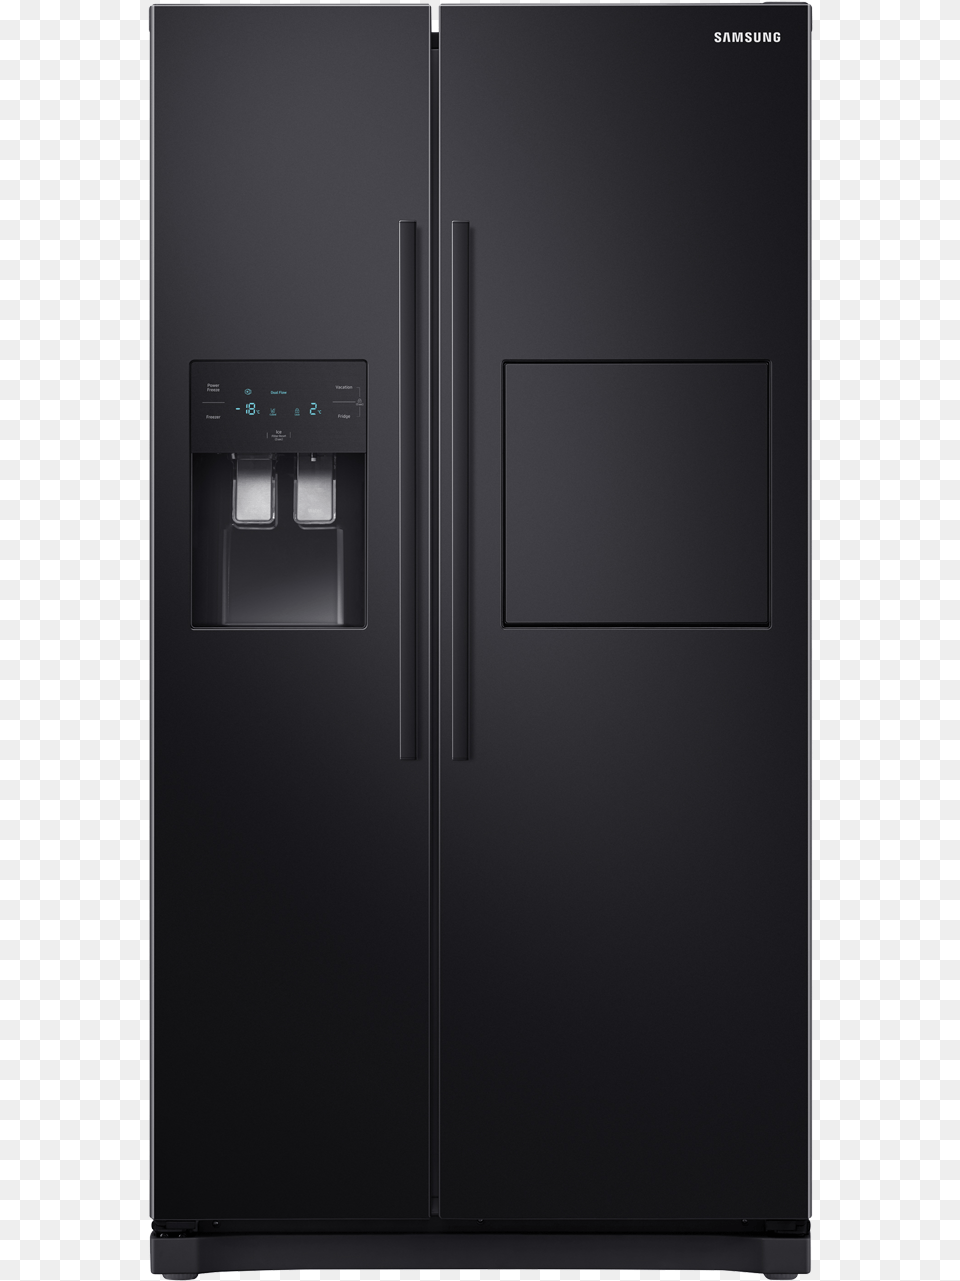 Samsung Fridge 2 Doors, Appliance, Device, Electrical Device, Refrigerator Png